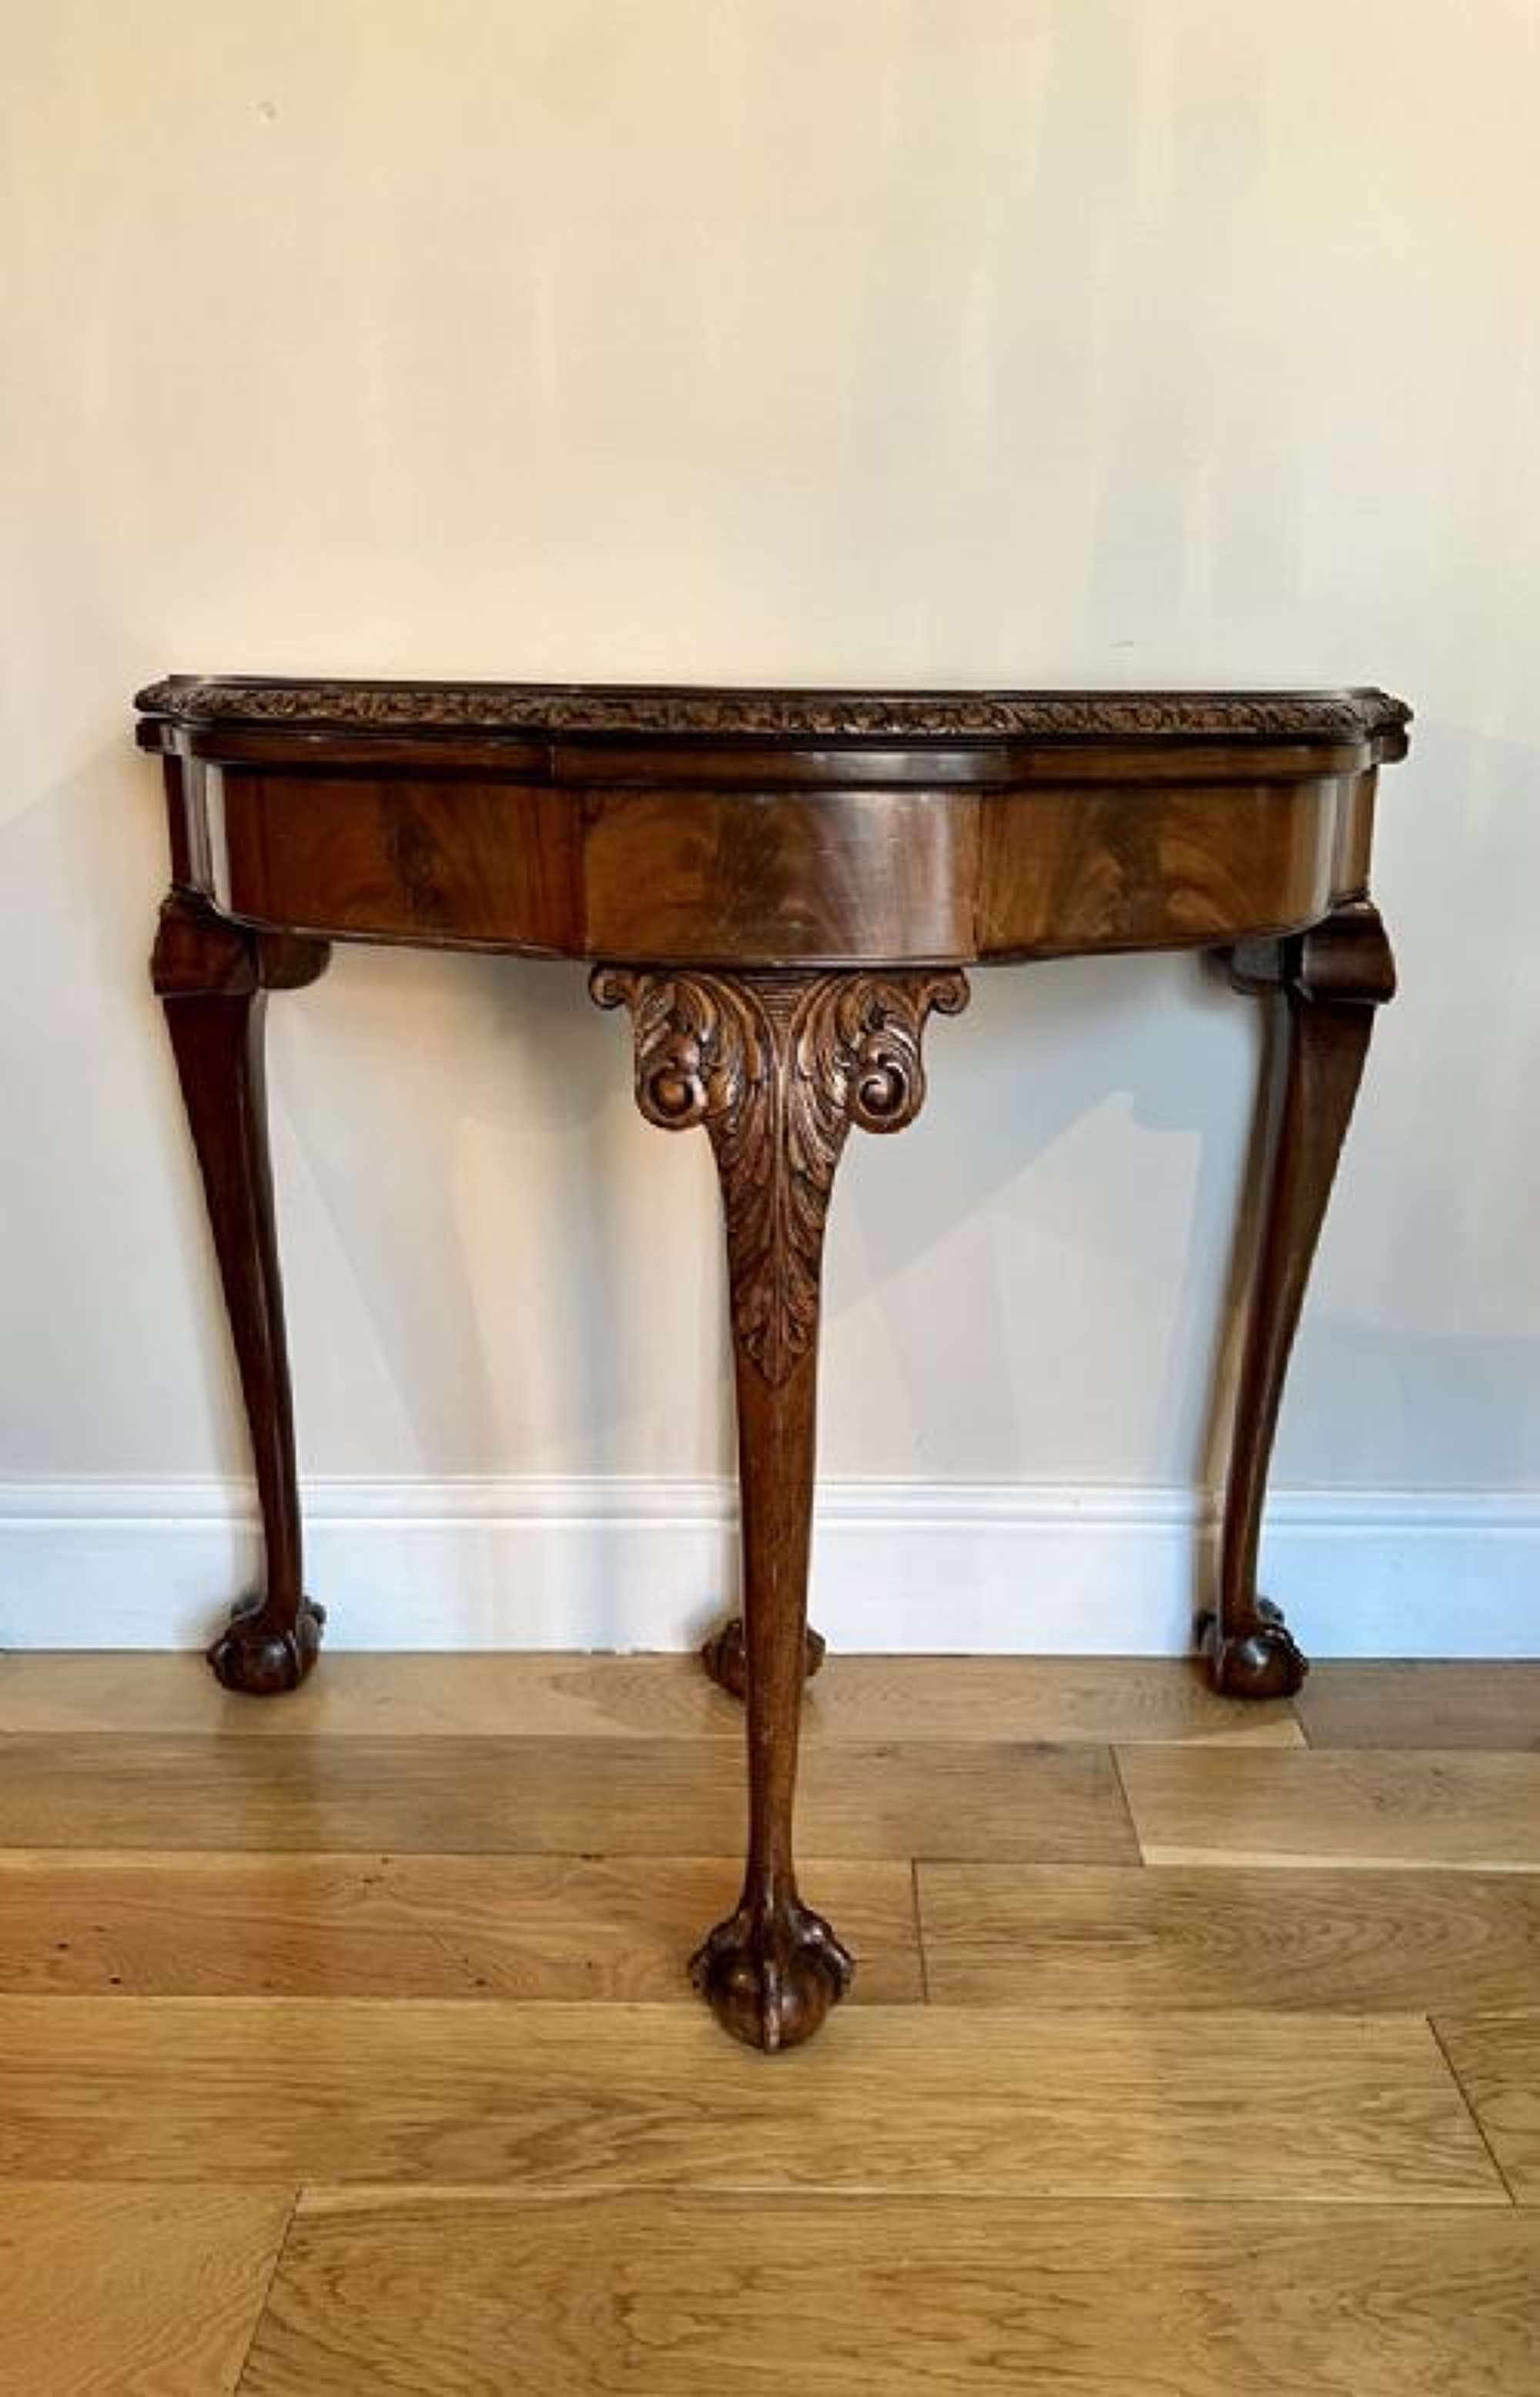 Antique Quality Figured Walnut Card Table (maple & Co)